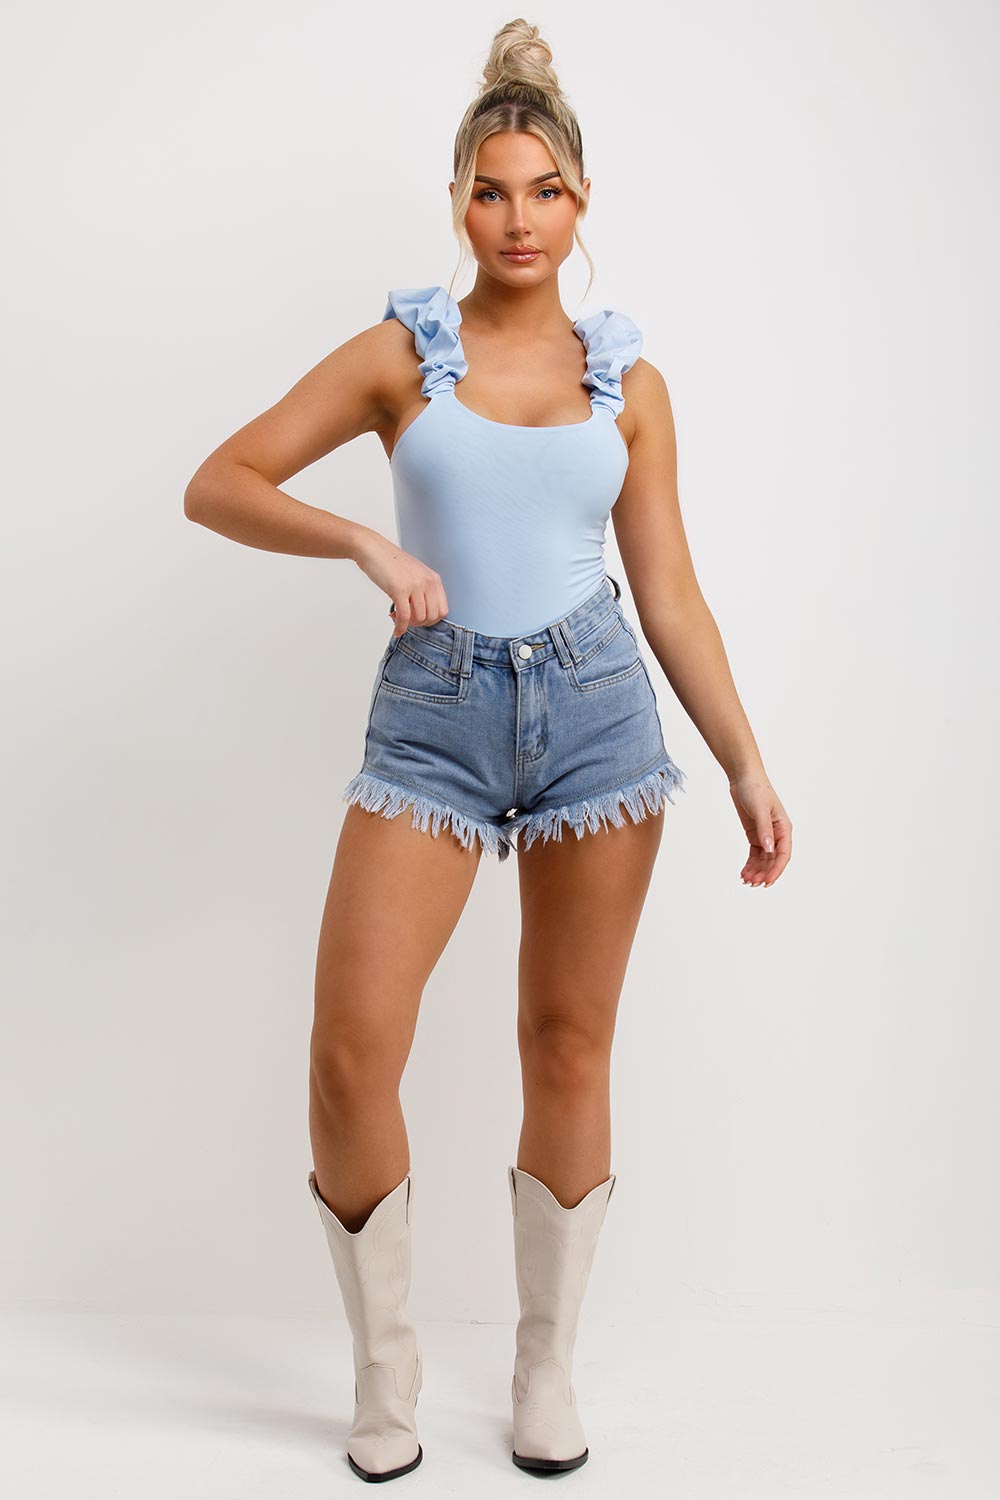 Women's Ruffle Ruched Strap Going Out Bodysuit Top Sky Blue